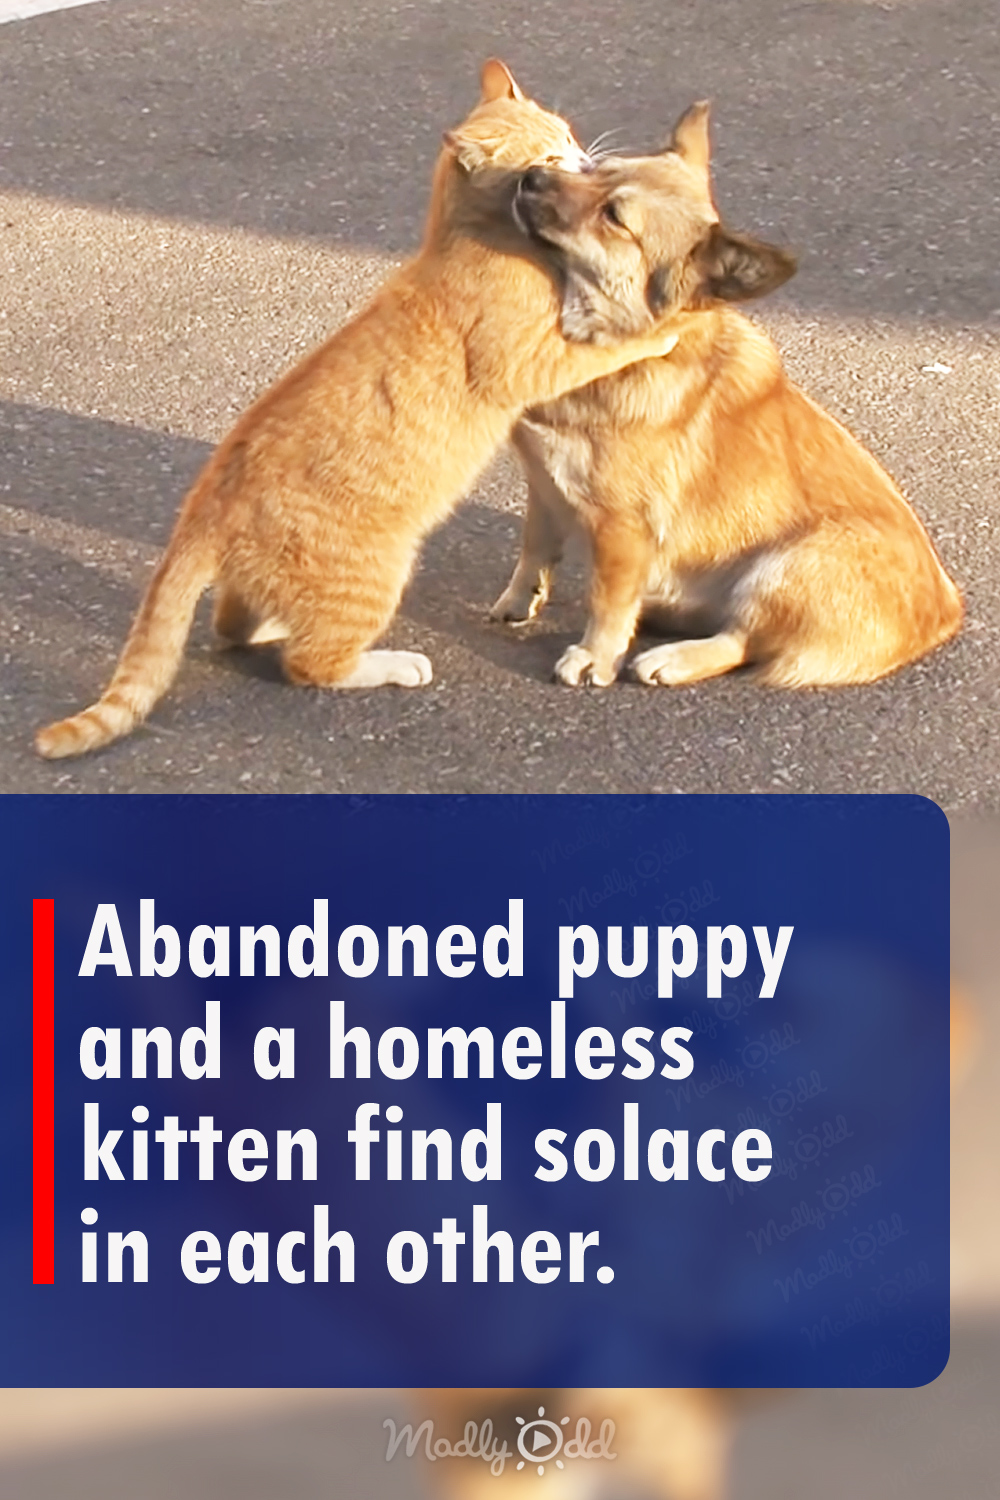 Abandoned puppy and a homeless kitten find solace in each other.